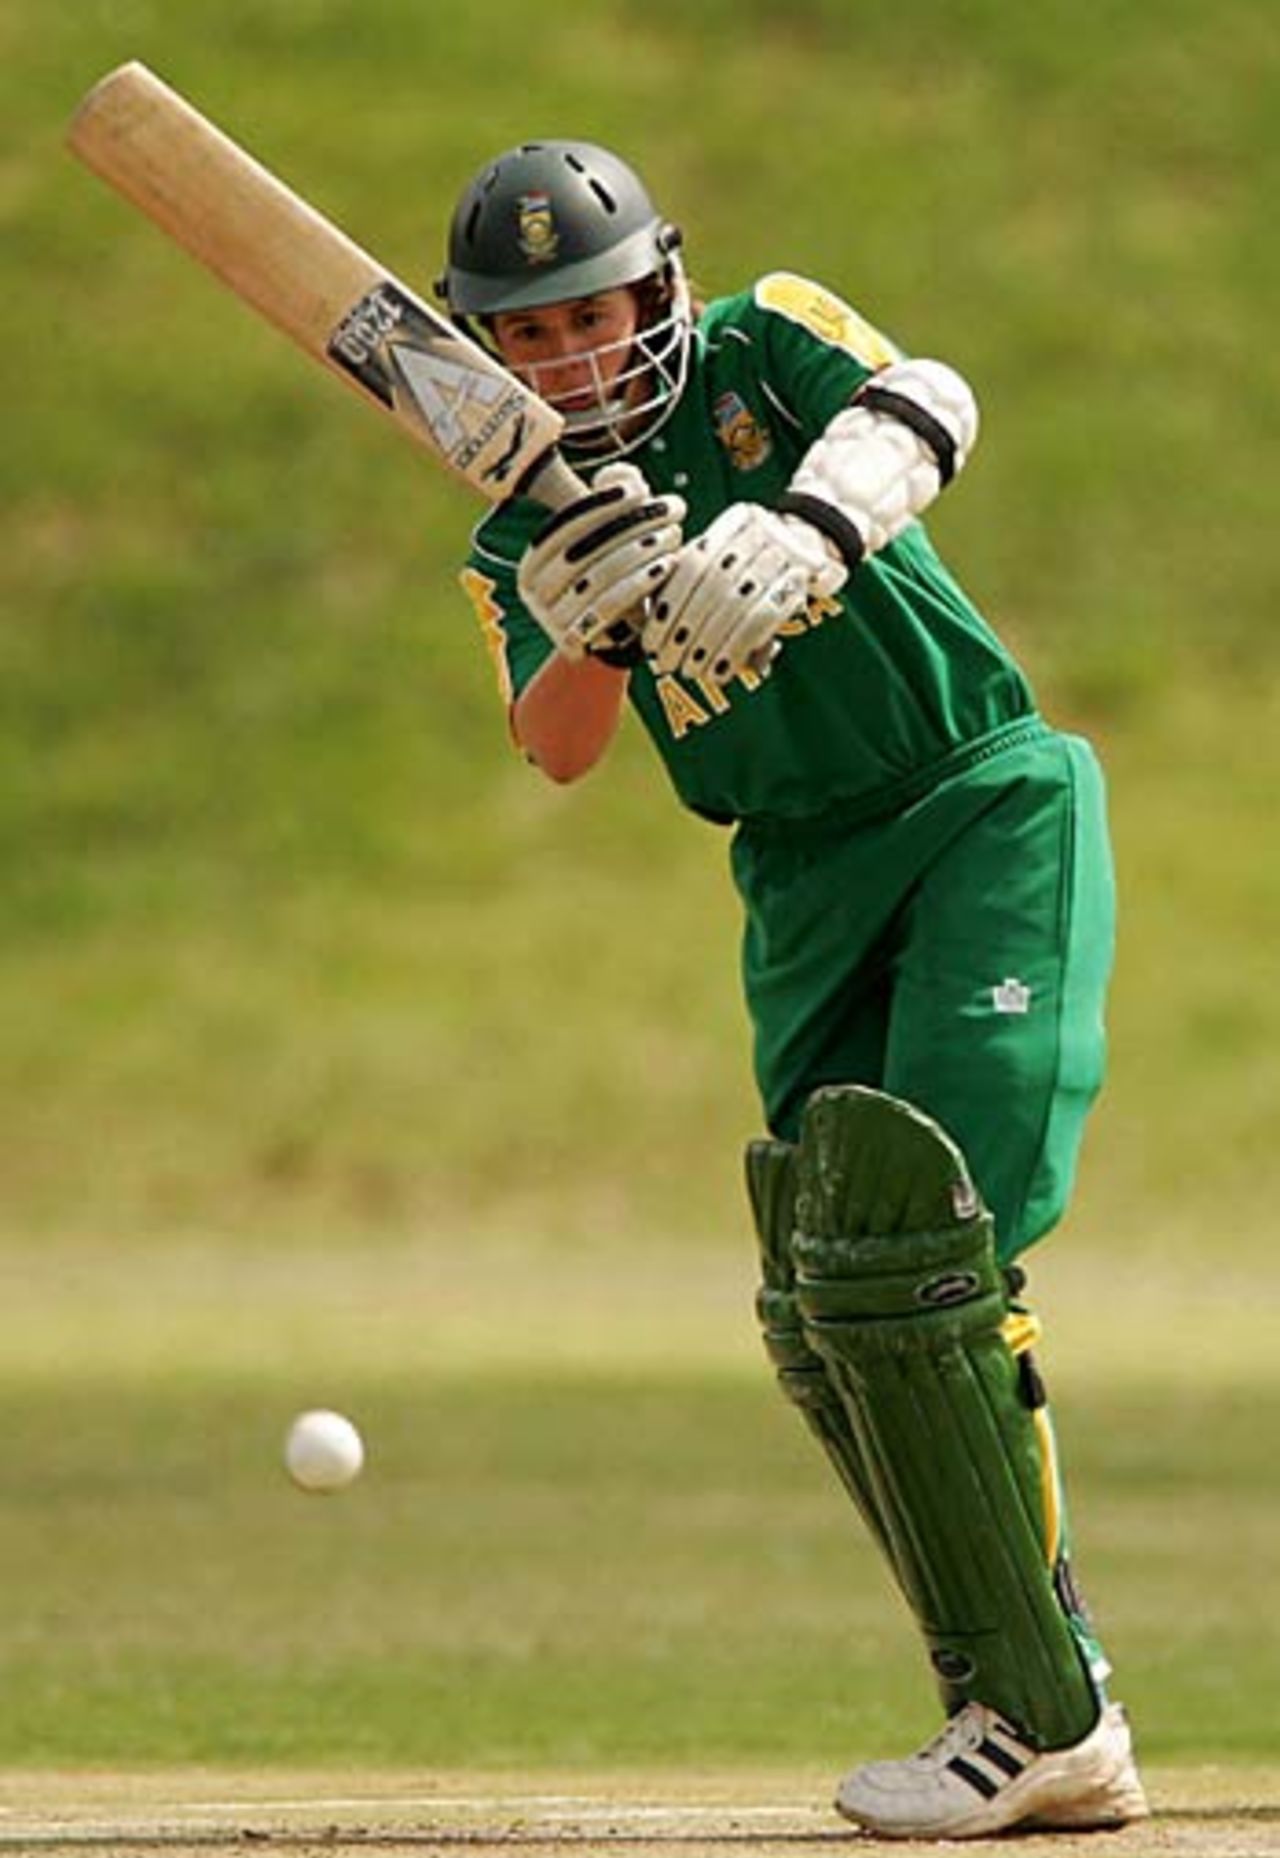 Johmari Logtenberg on her way to 23, England v South Africa, Women's World Cup, March 30, 2005